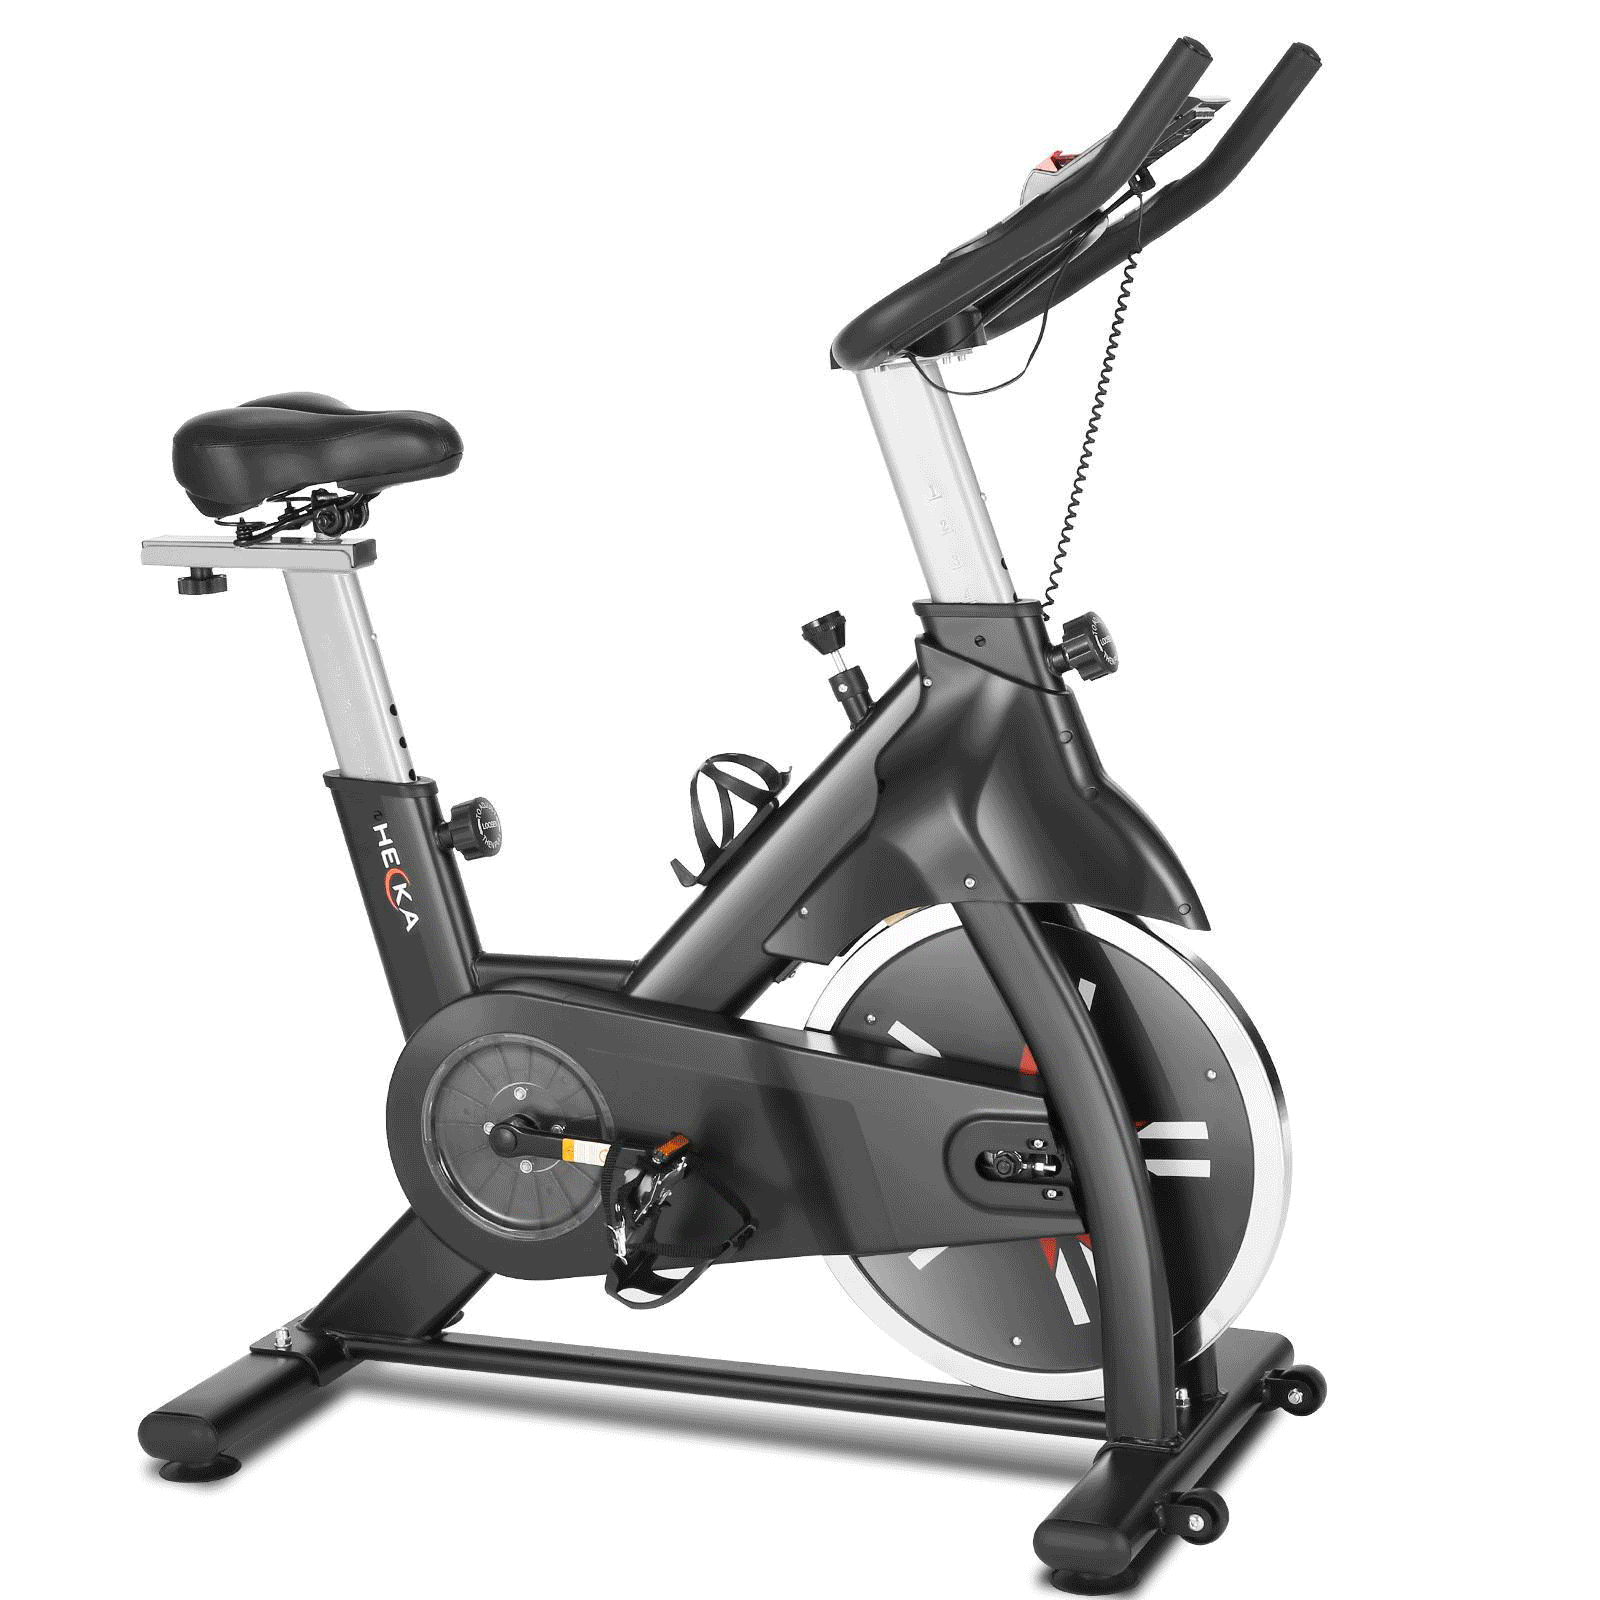 Black Exercise Bike Home Gym Bicycle Cycling Cardio Fitness Training Indoor Use 